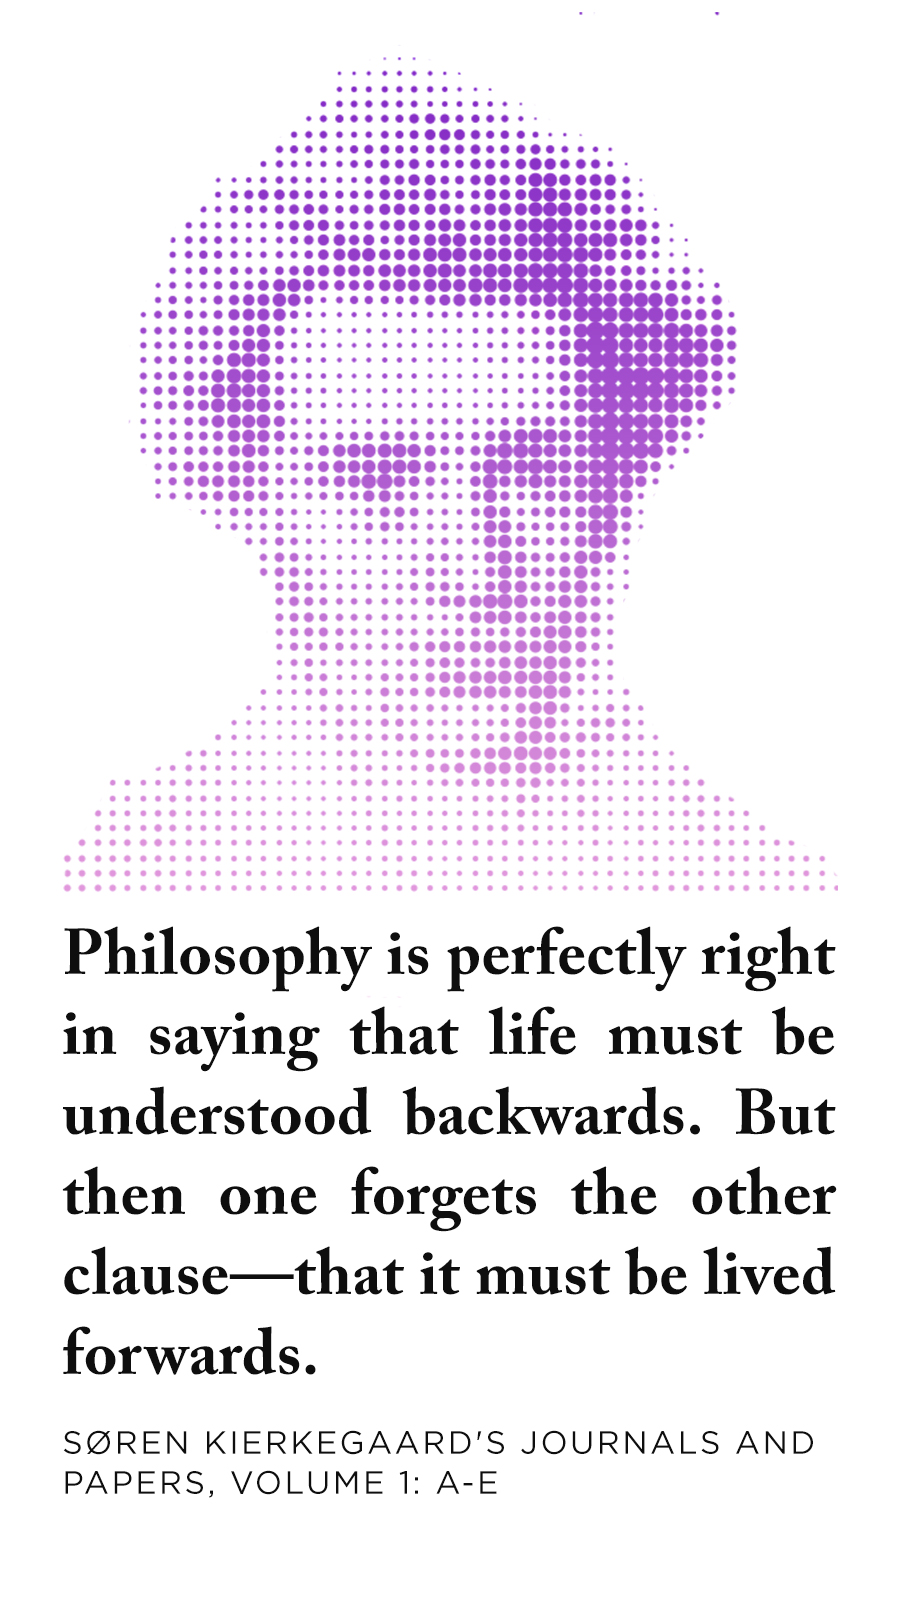 Quote: Philosophy is perfectly right in saying that life must be understood backwards. But then one forgets the other clause -- that it must be lived forwards.